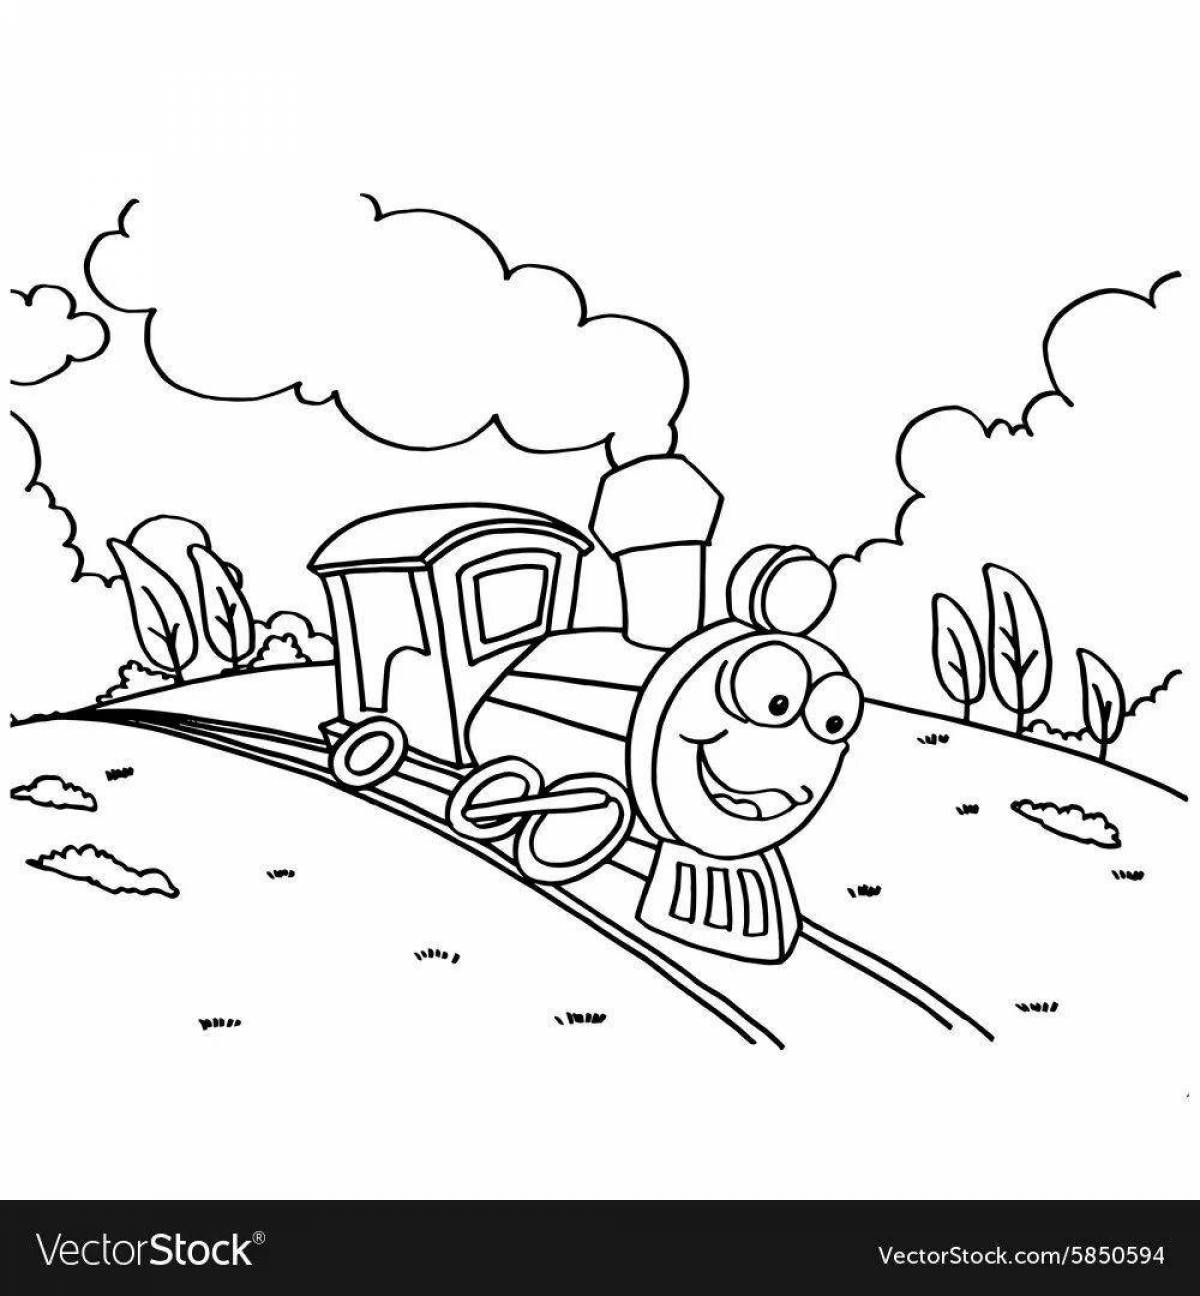 Inspiring rail safety coloring page